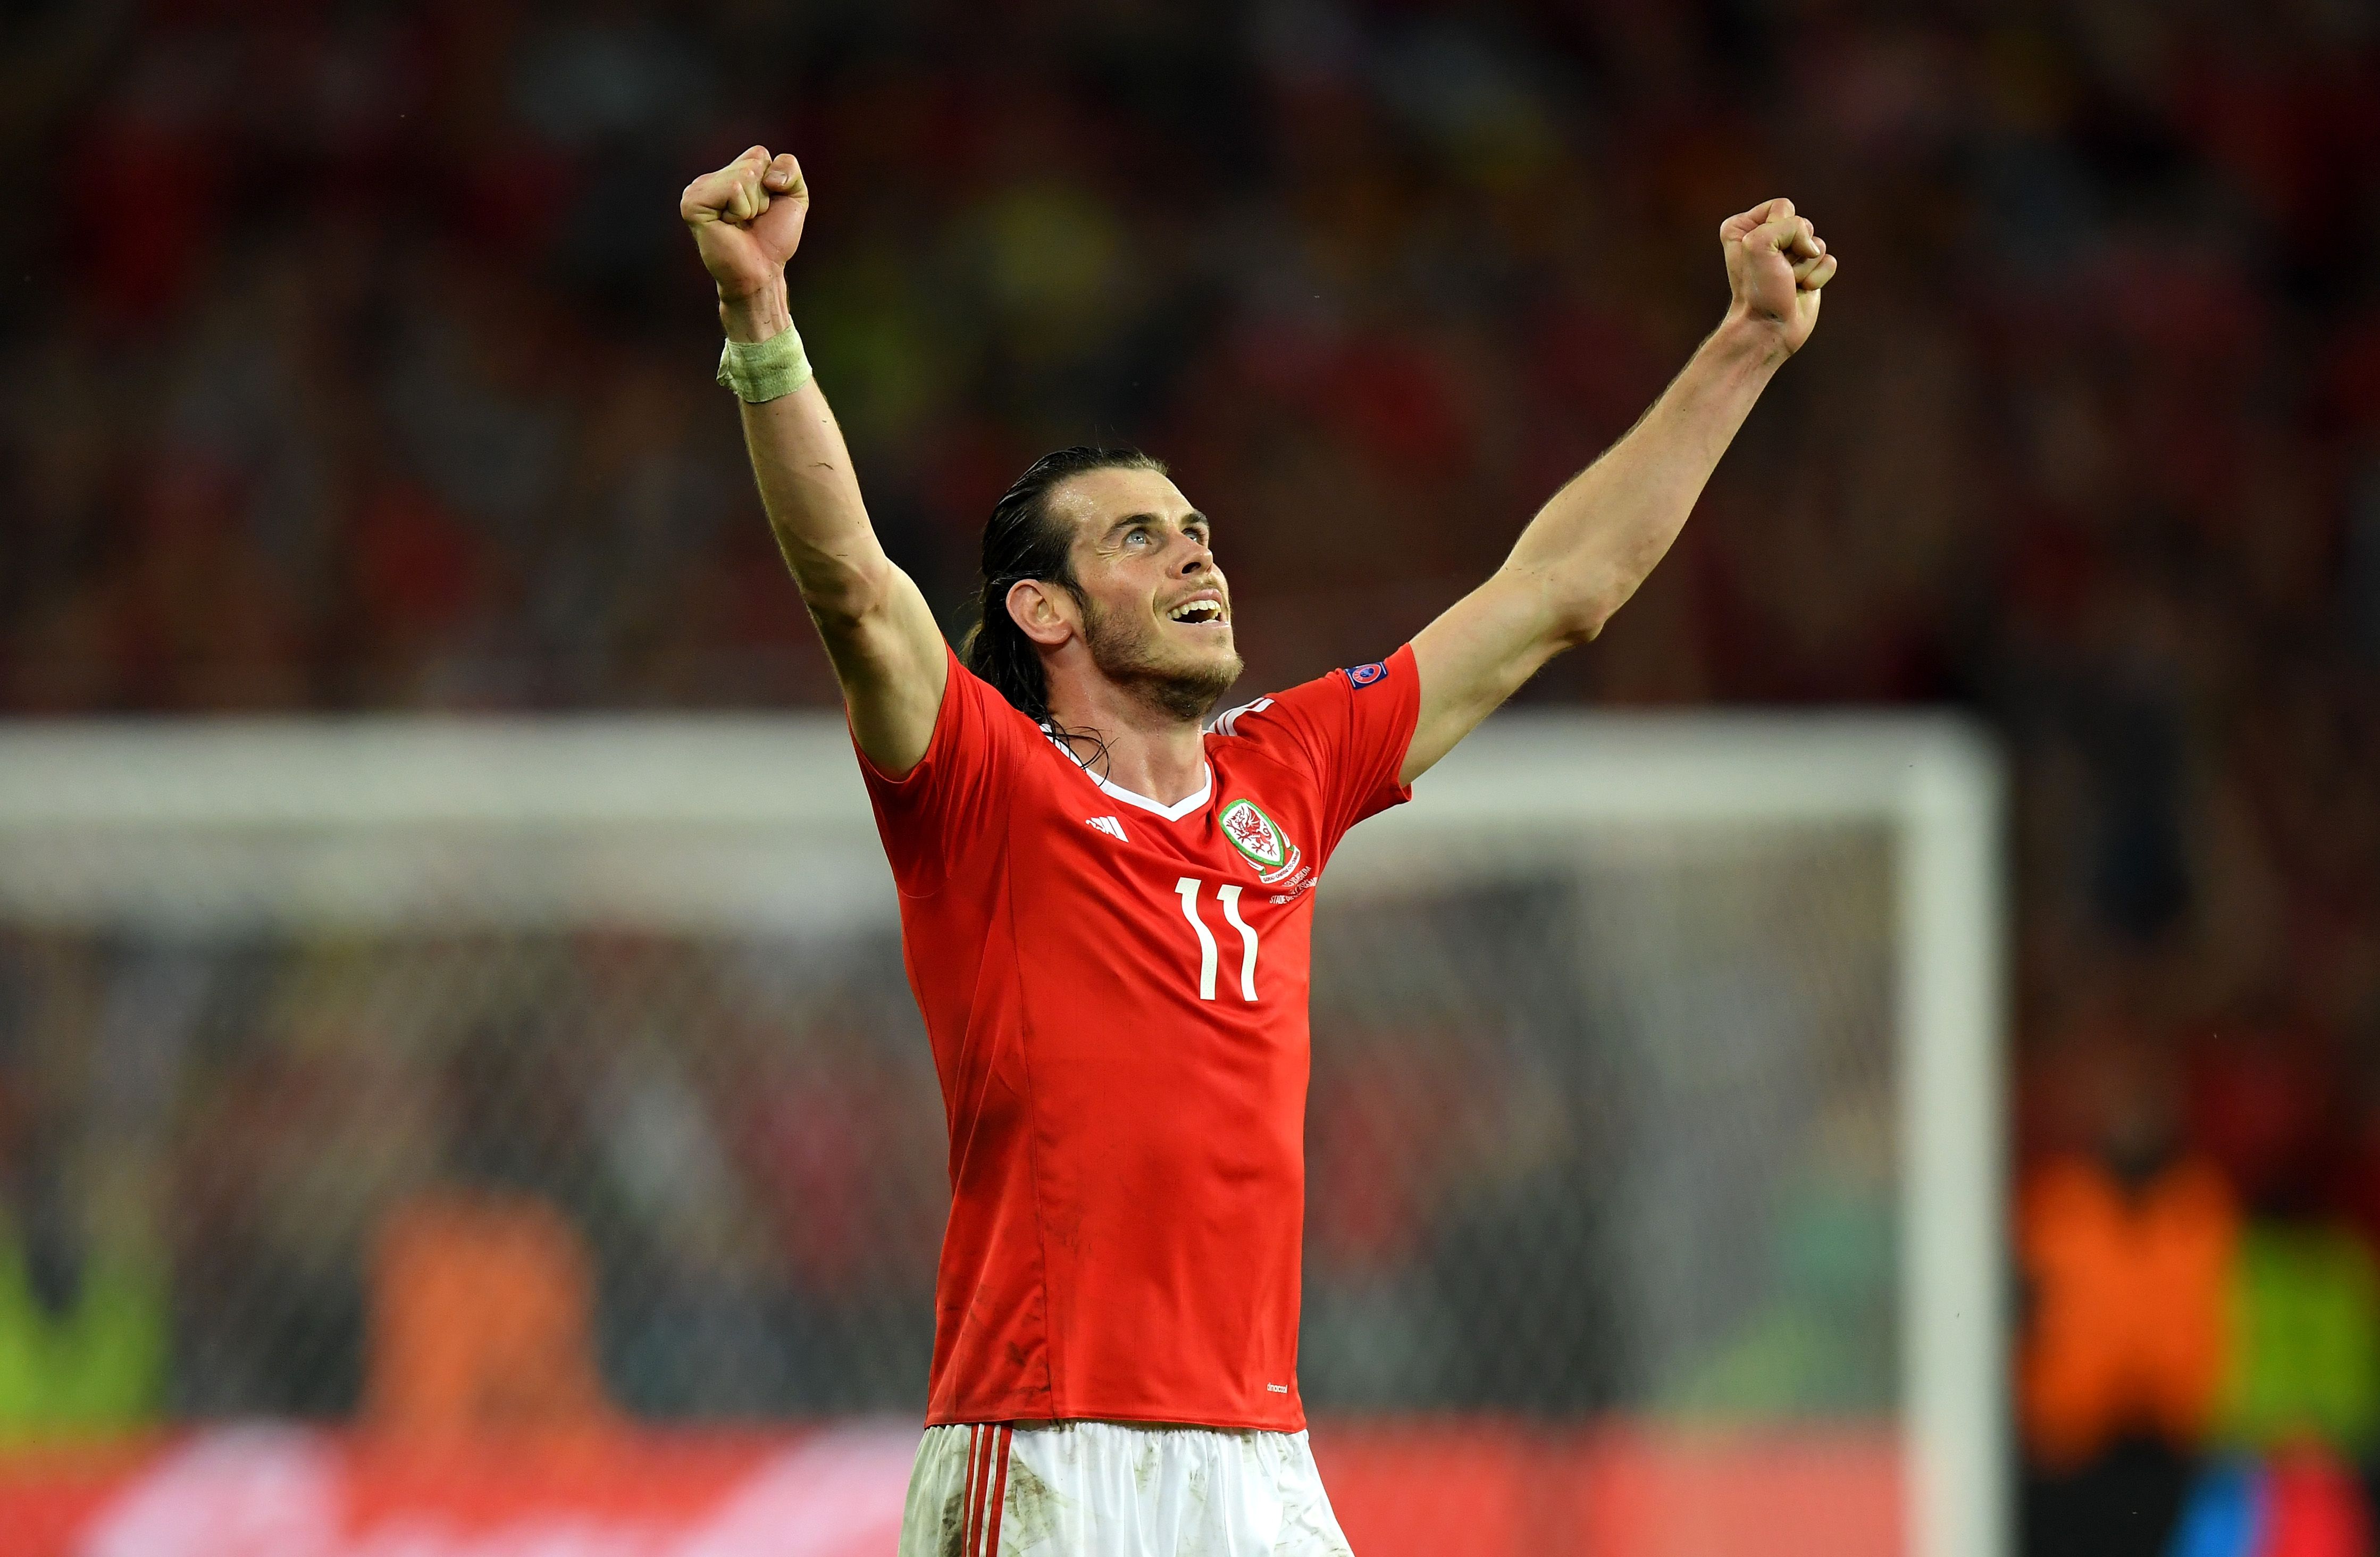 Gareth Bale of Wales celebrates his team's 3-1 win after the UEFA EURO 2016 quarterfinal.